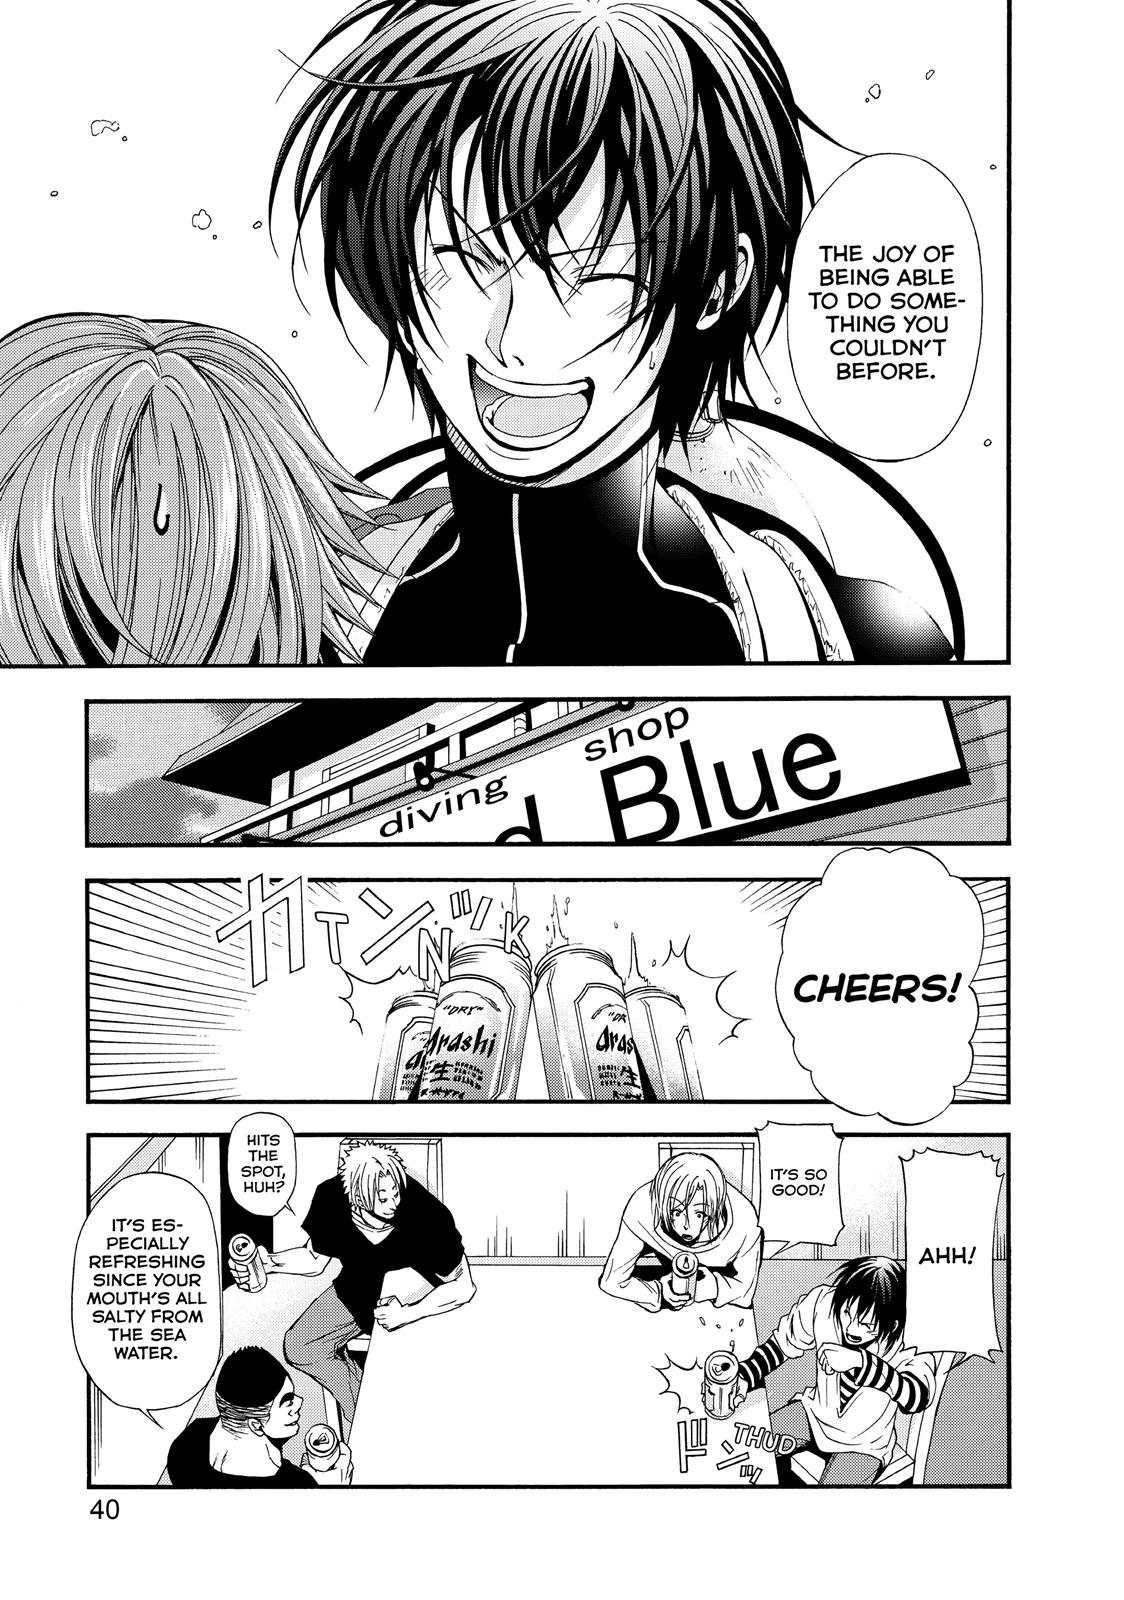 Grand Blue, Chapter 5 image 40